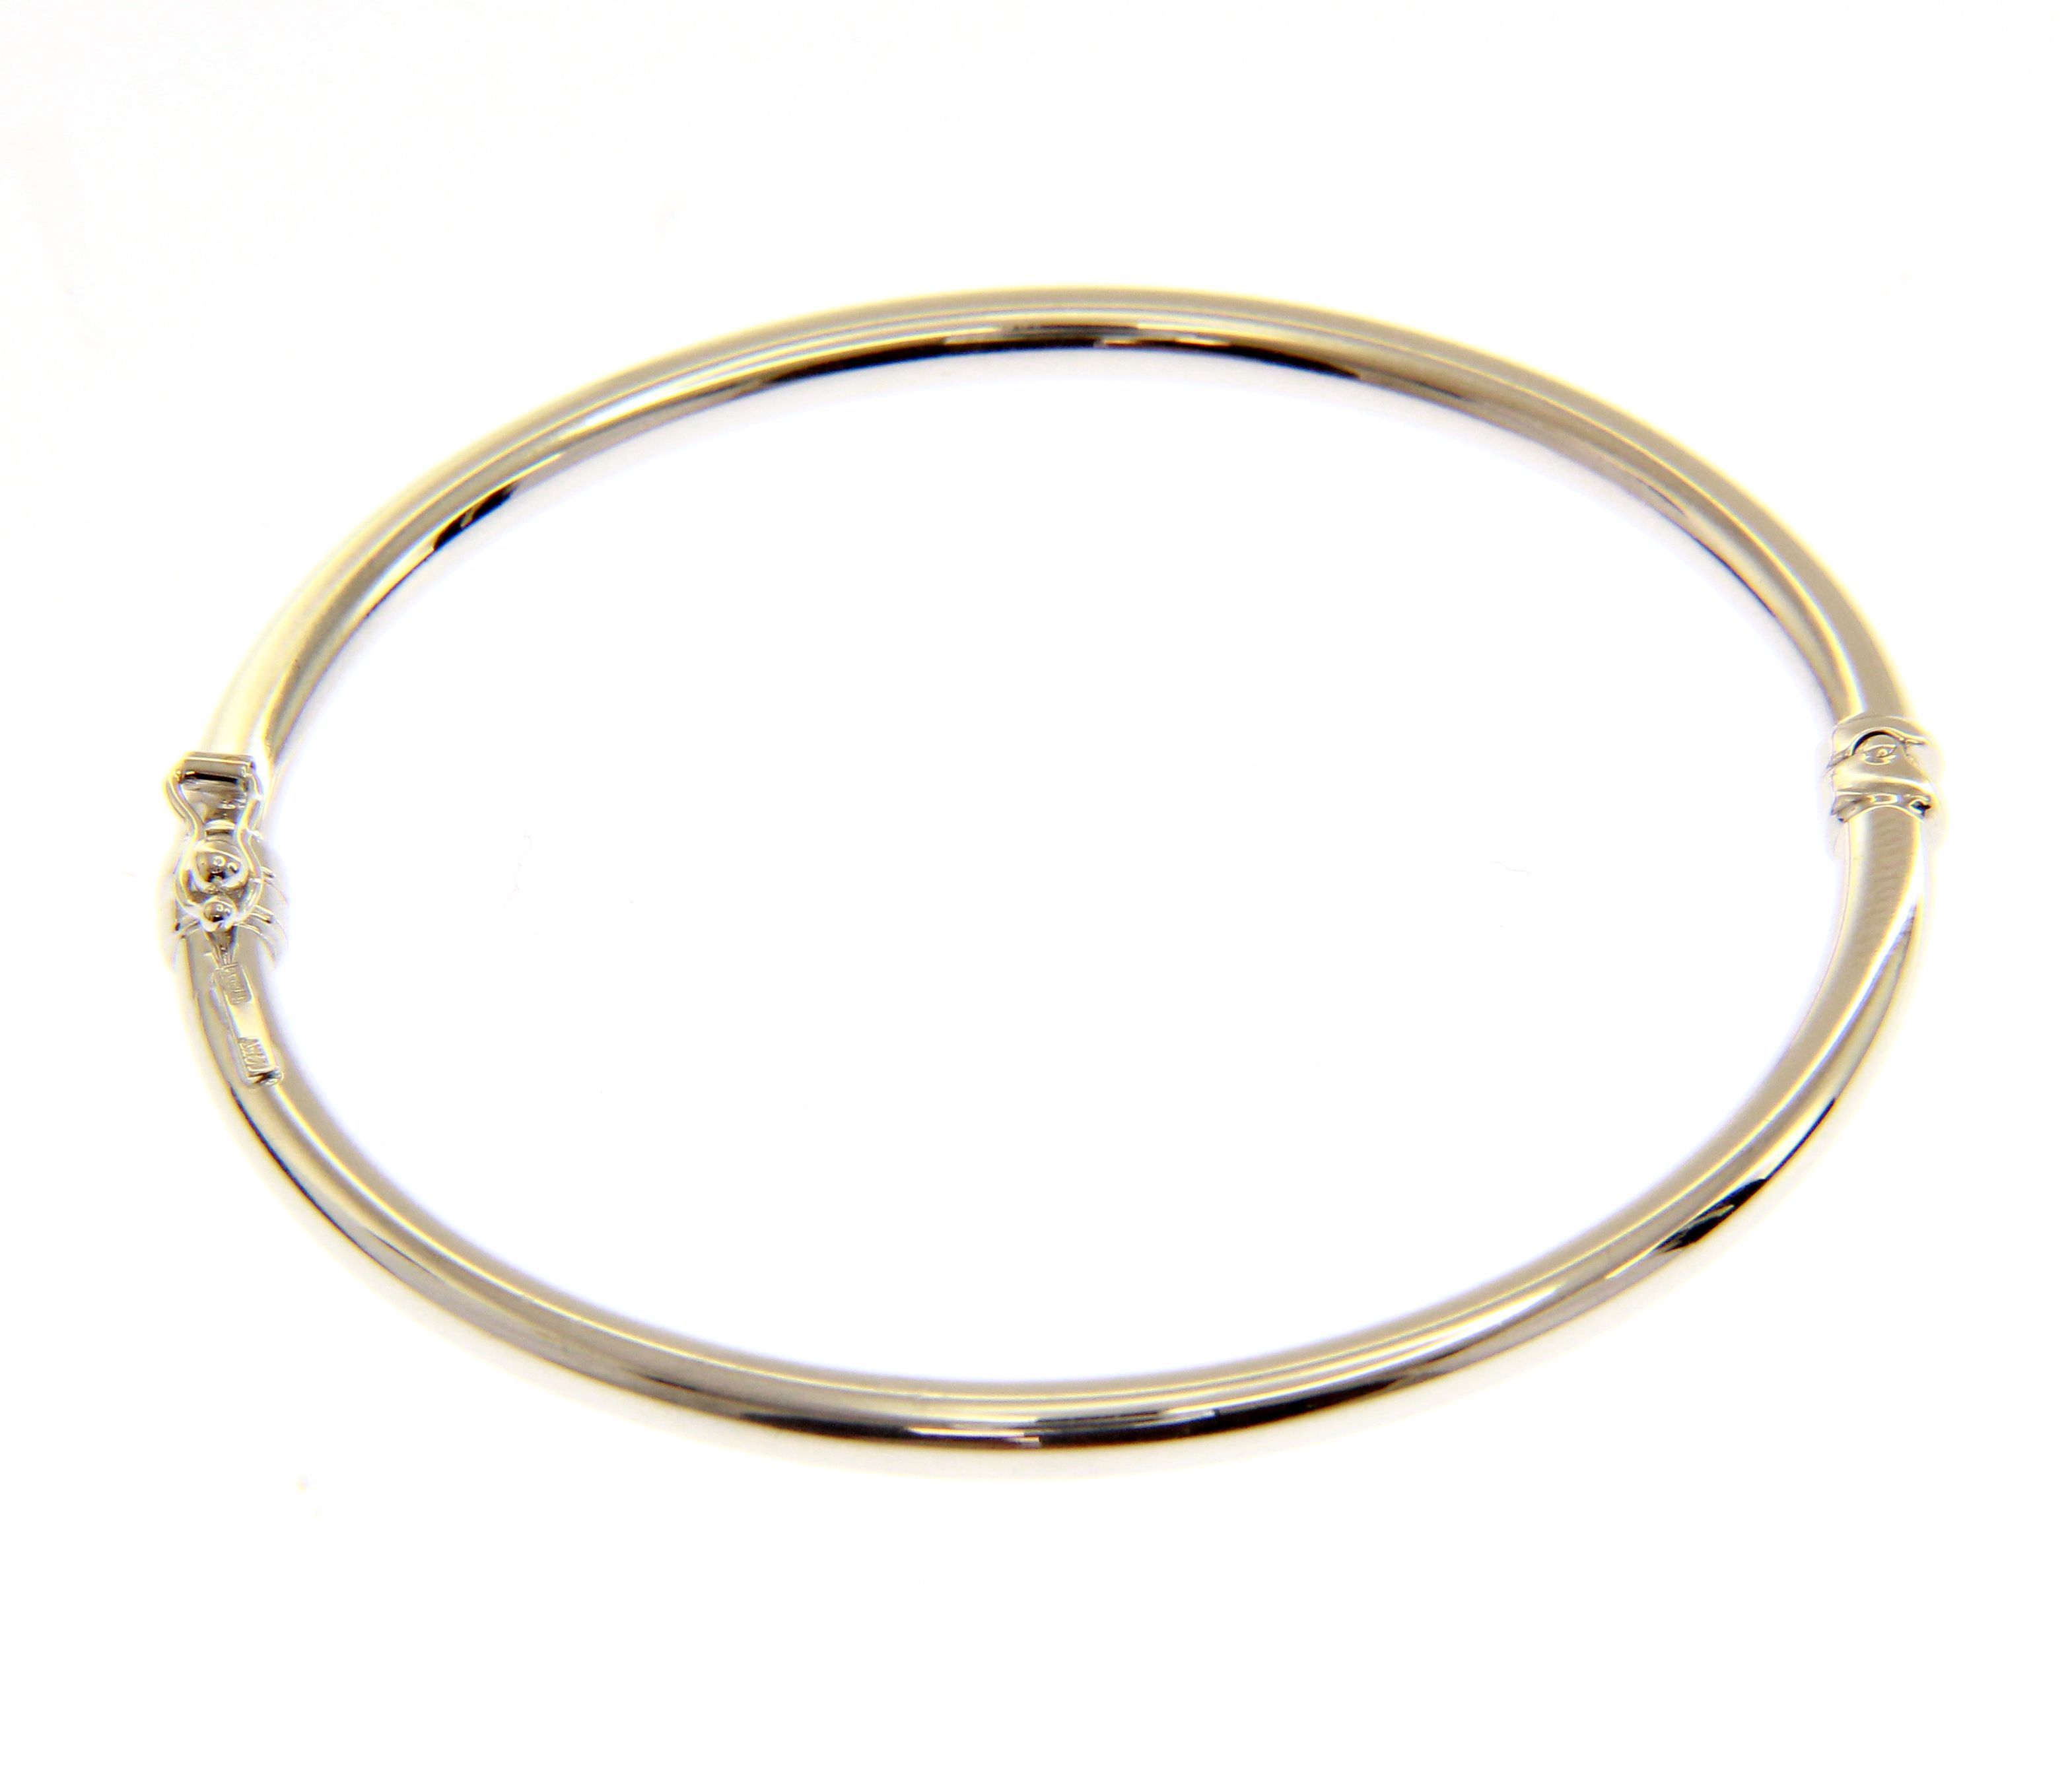 White gold oval bracelet with clasp k14 (code S205139)